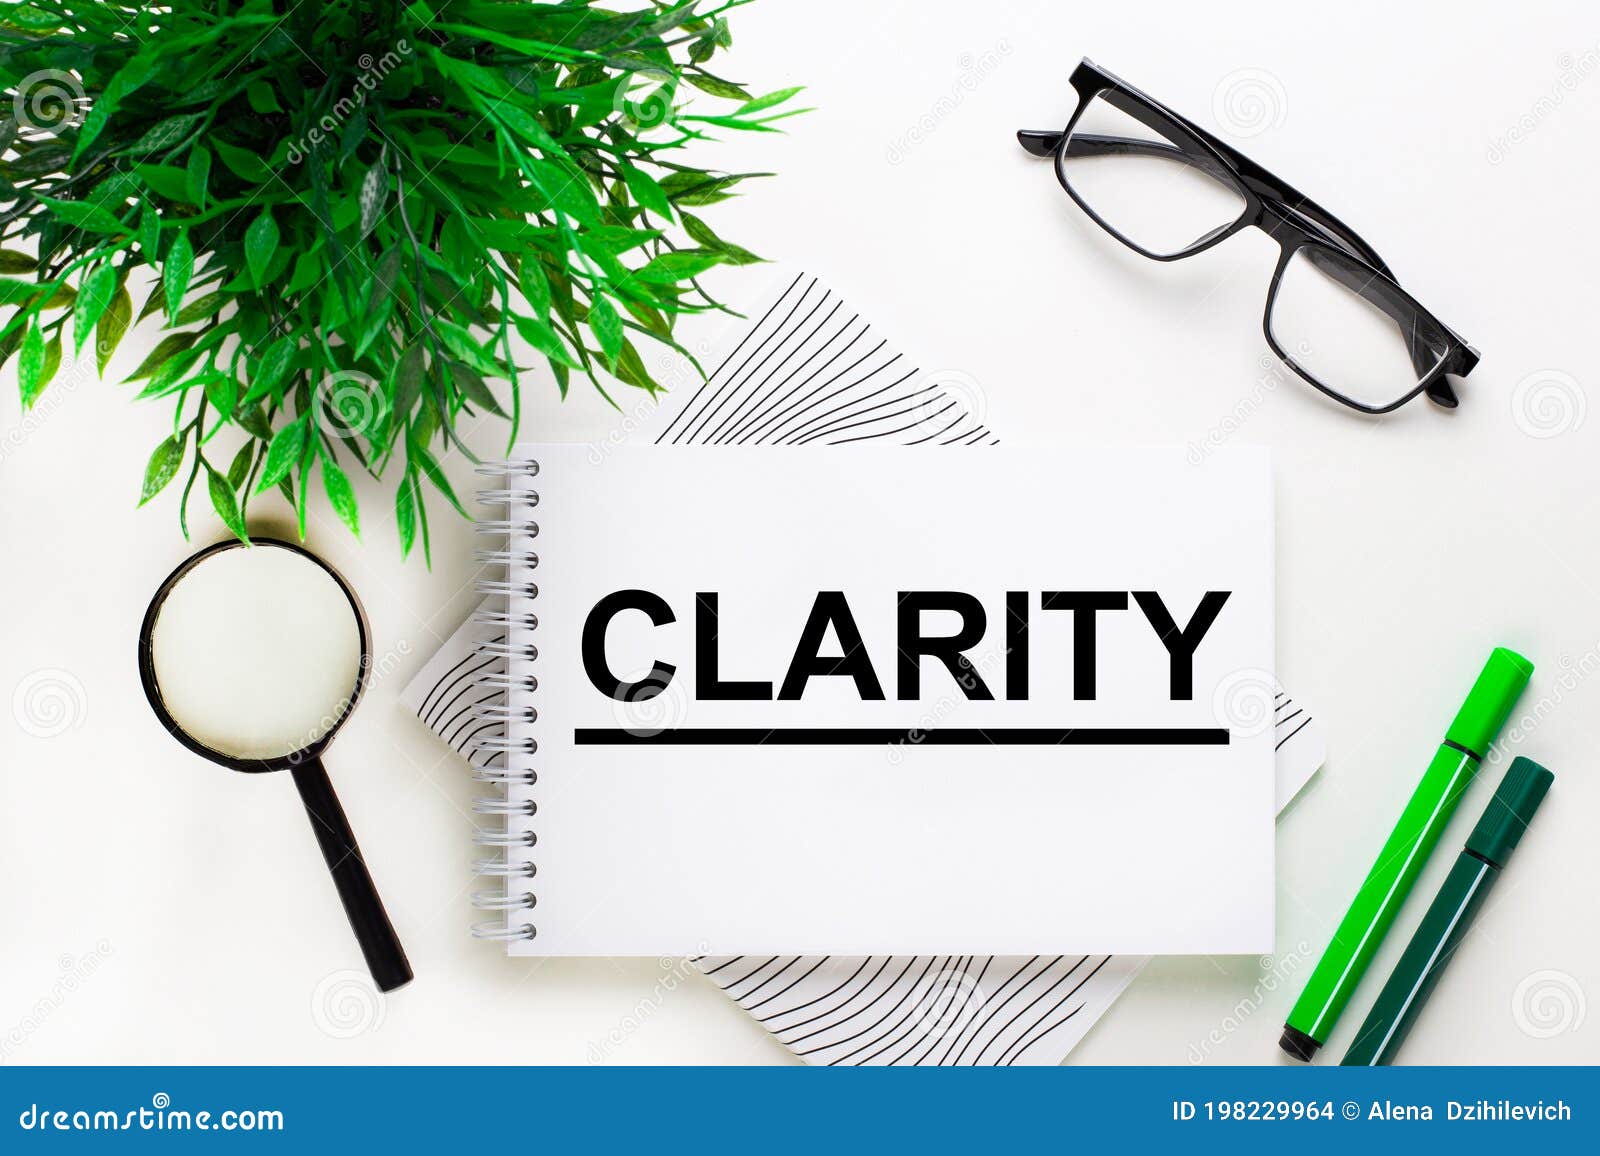 on a white background lies a notebook with the word clarity, glasses, a magnifying glass, green markers and a green plant